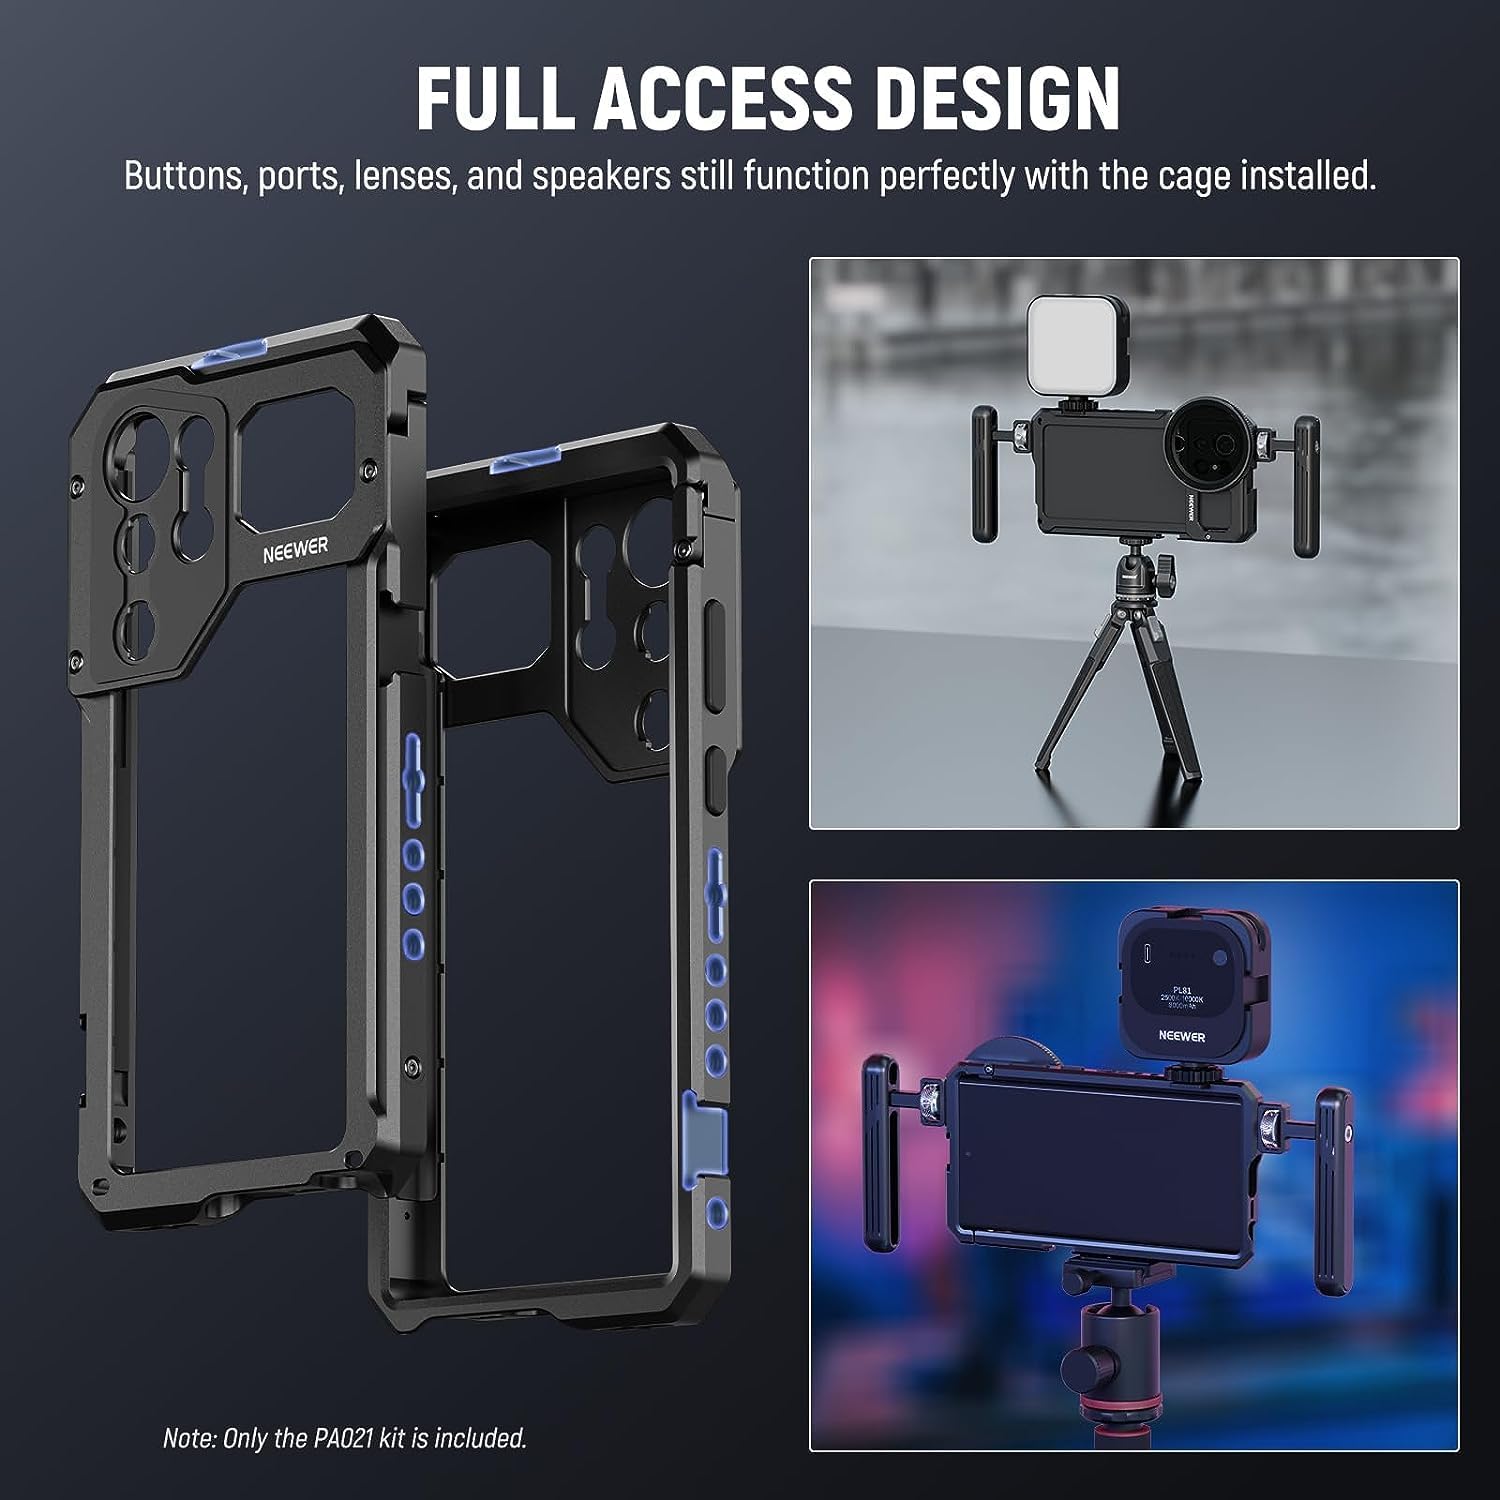 NEEWER S23 Ultra Cage Video Rig with Dual Side Handles, 67mm Lens Filter Thread Adapter, All Metal Mobile Phone Stabilizer for Filmmaking Video Recording Compatible with Samsung S23 Ultra, PA021